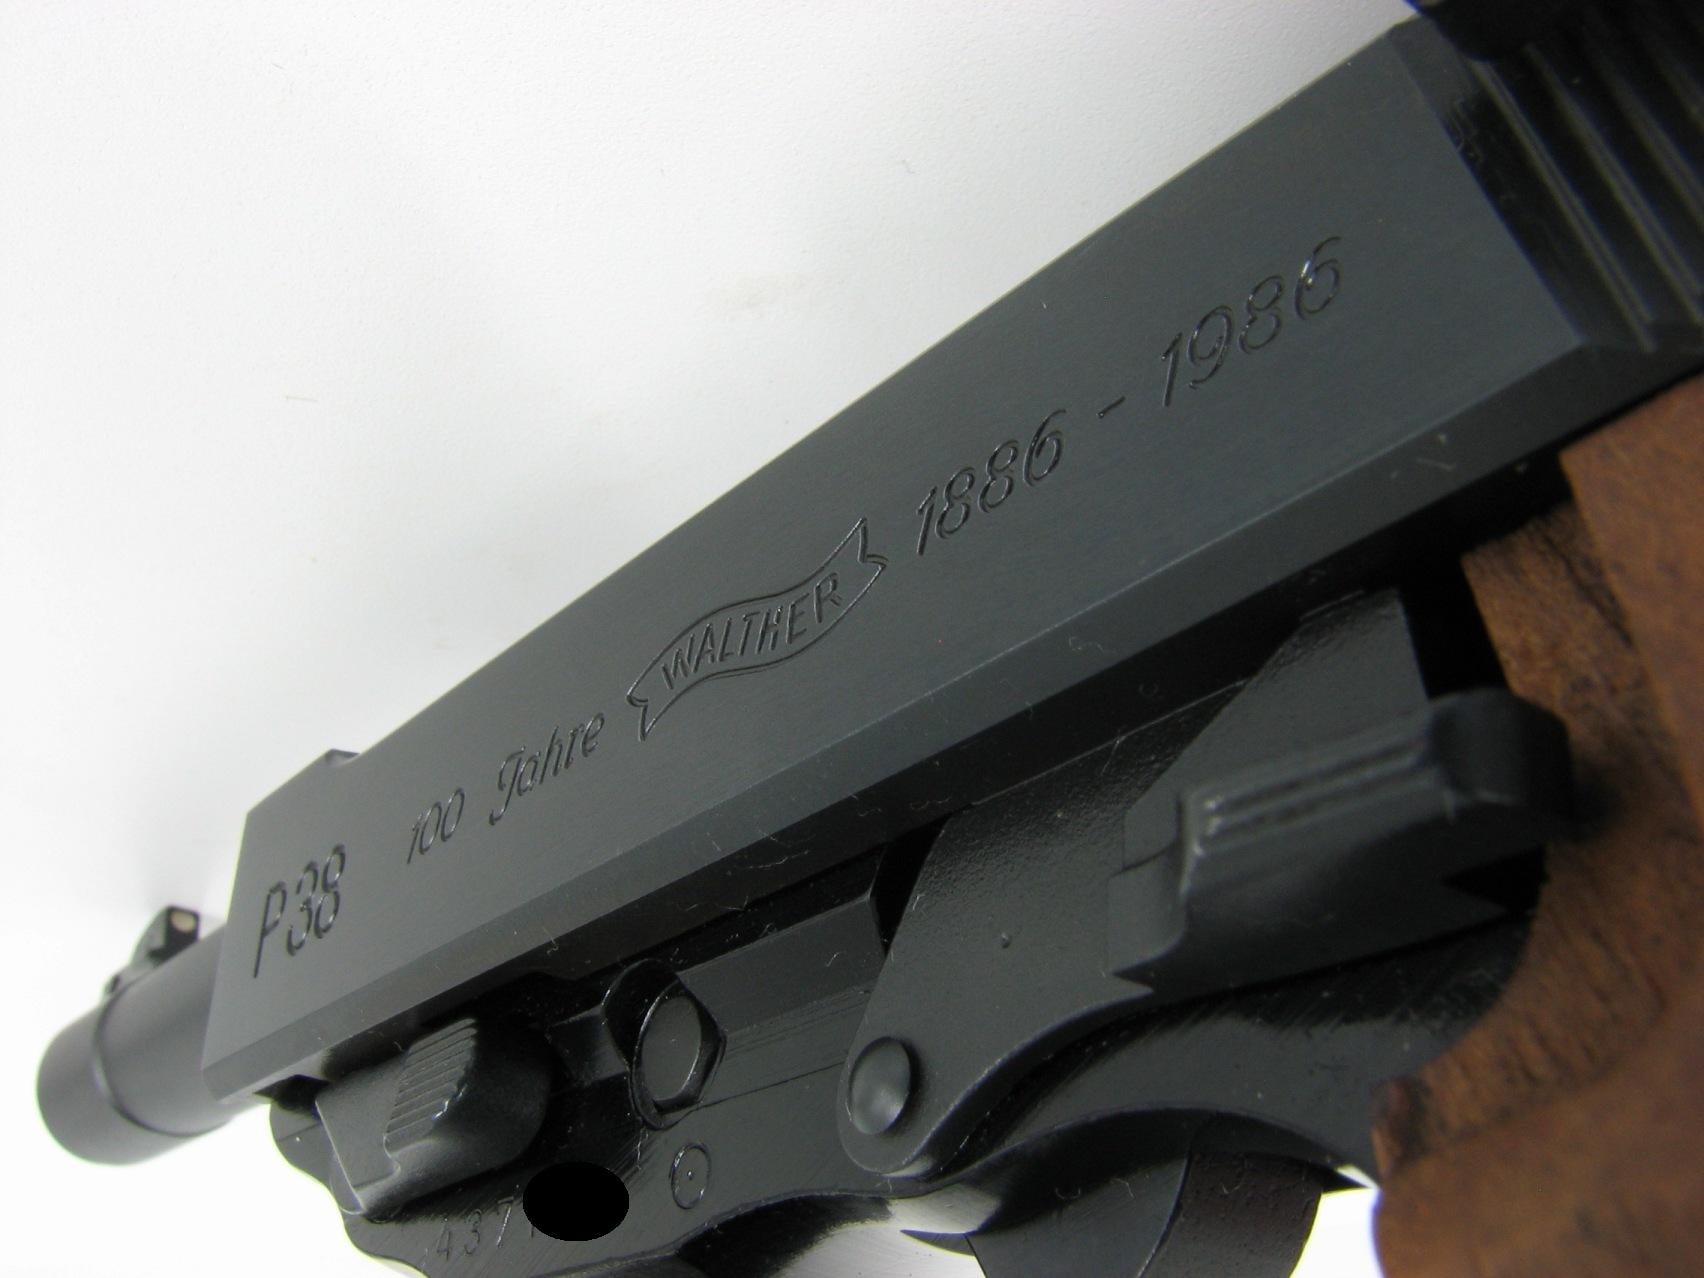 walther p38 serial number date